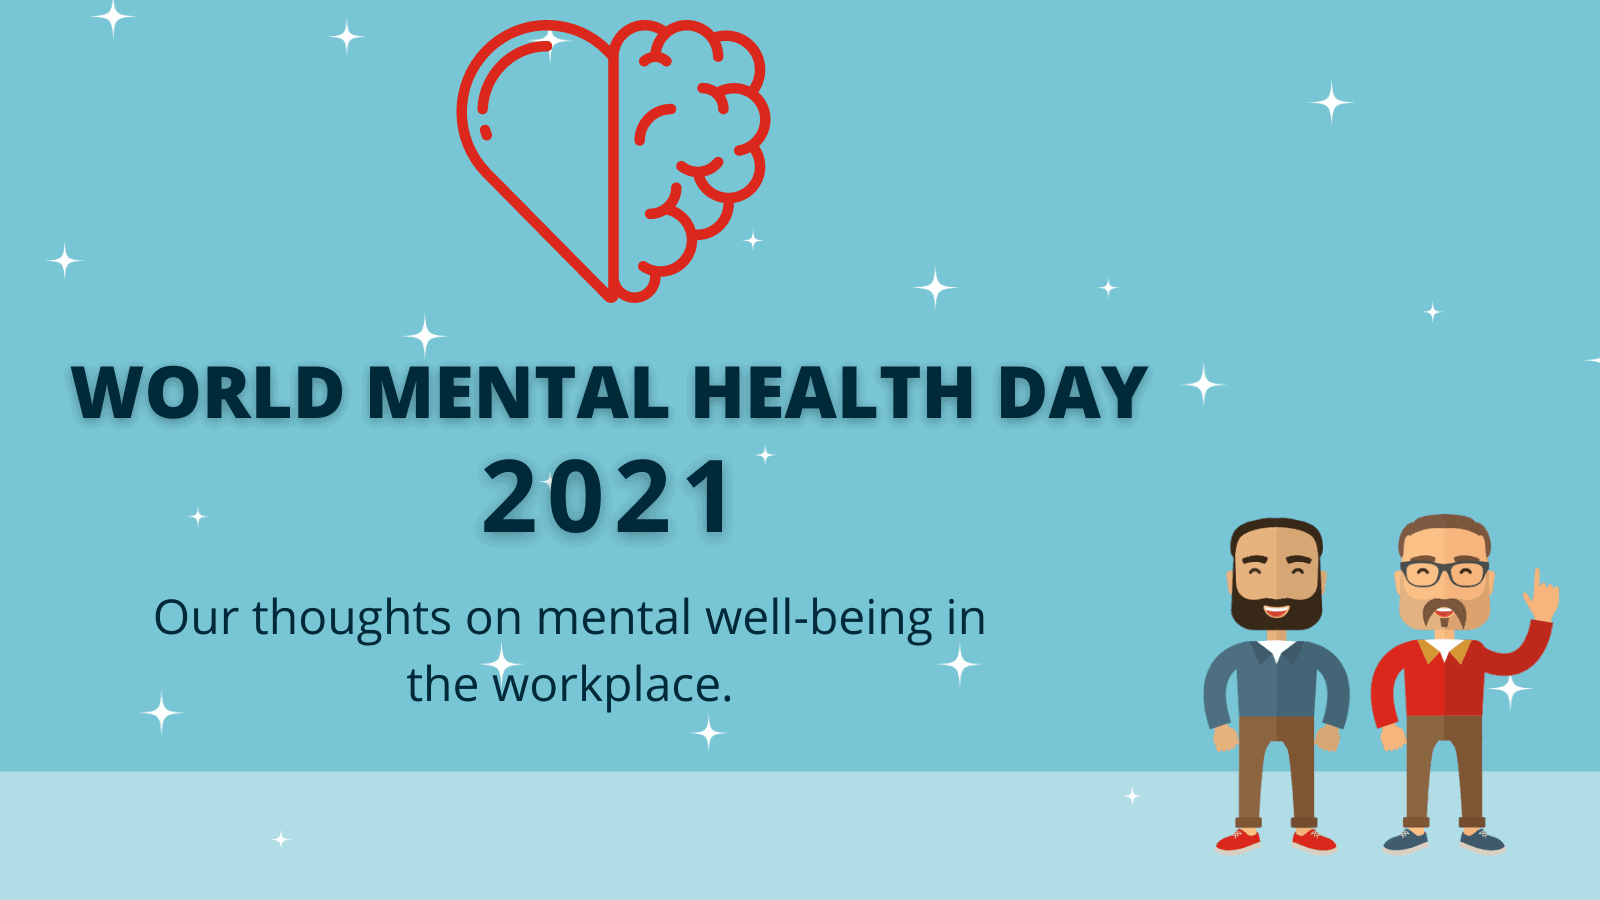 World Mental Health Day advice from Rocket CRM